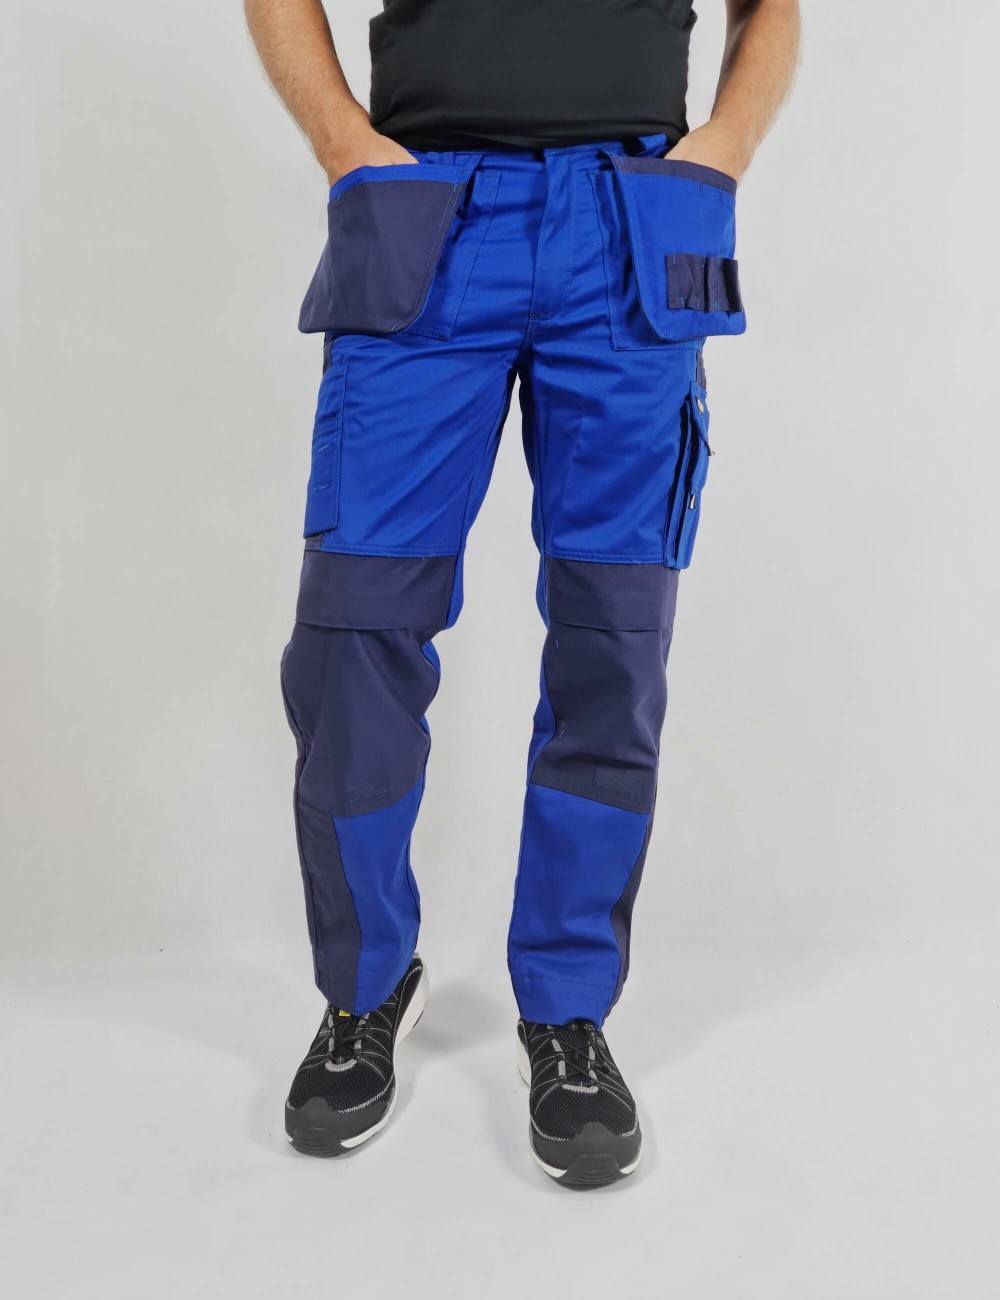 High Visibility work trousers 245g - OMAHA - DASSY